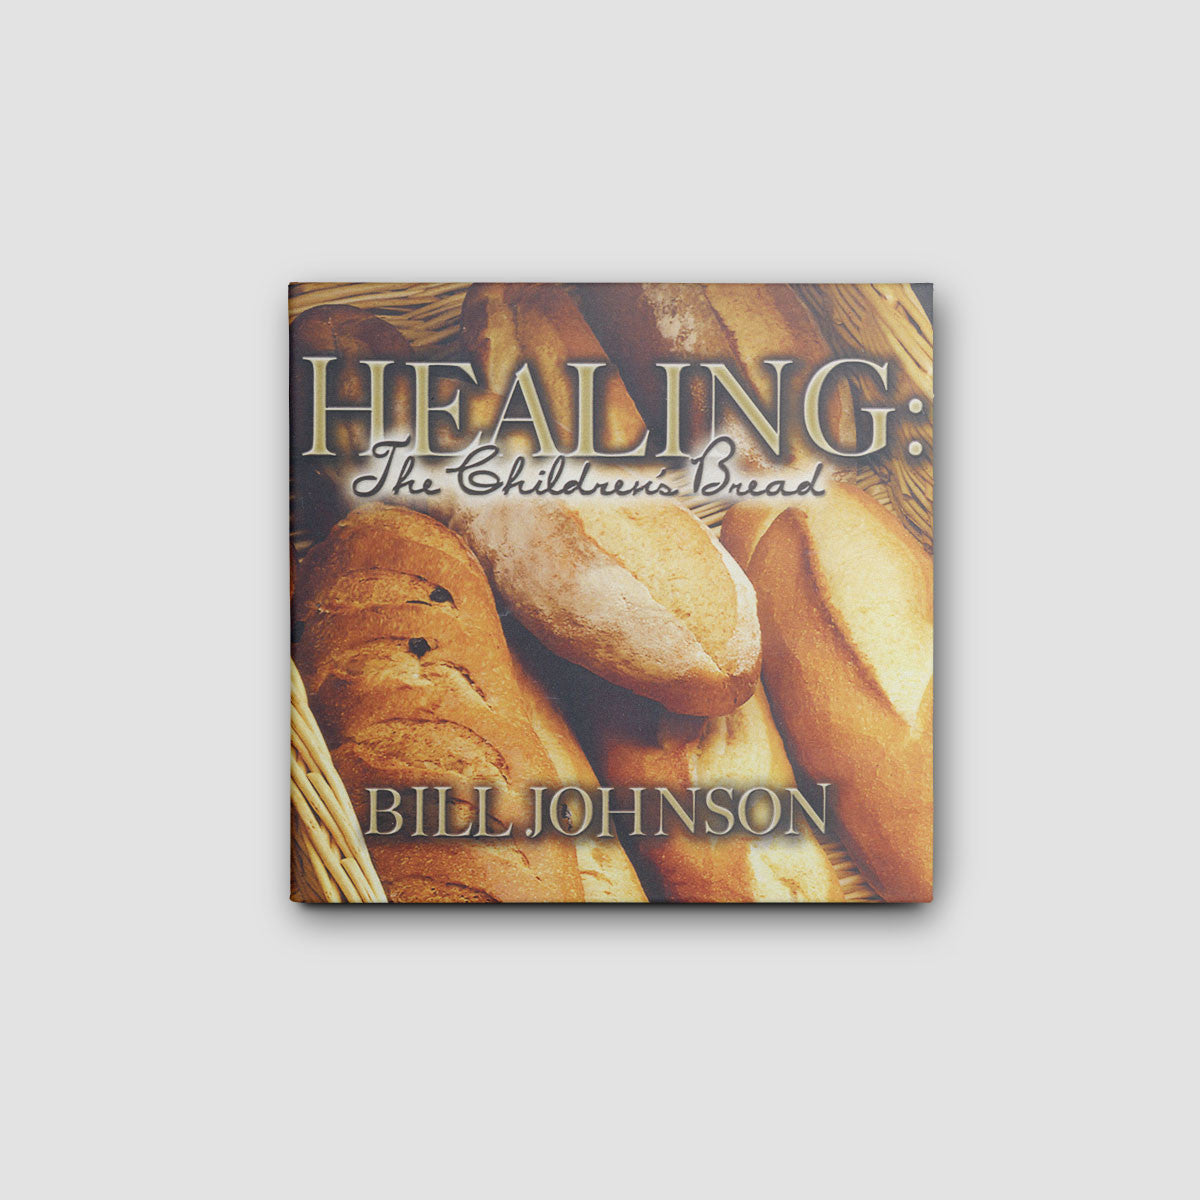 Healing: The Childrens Bread